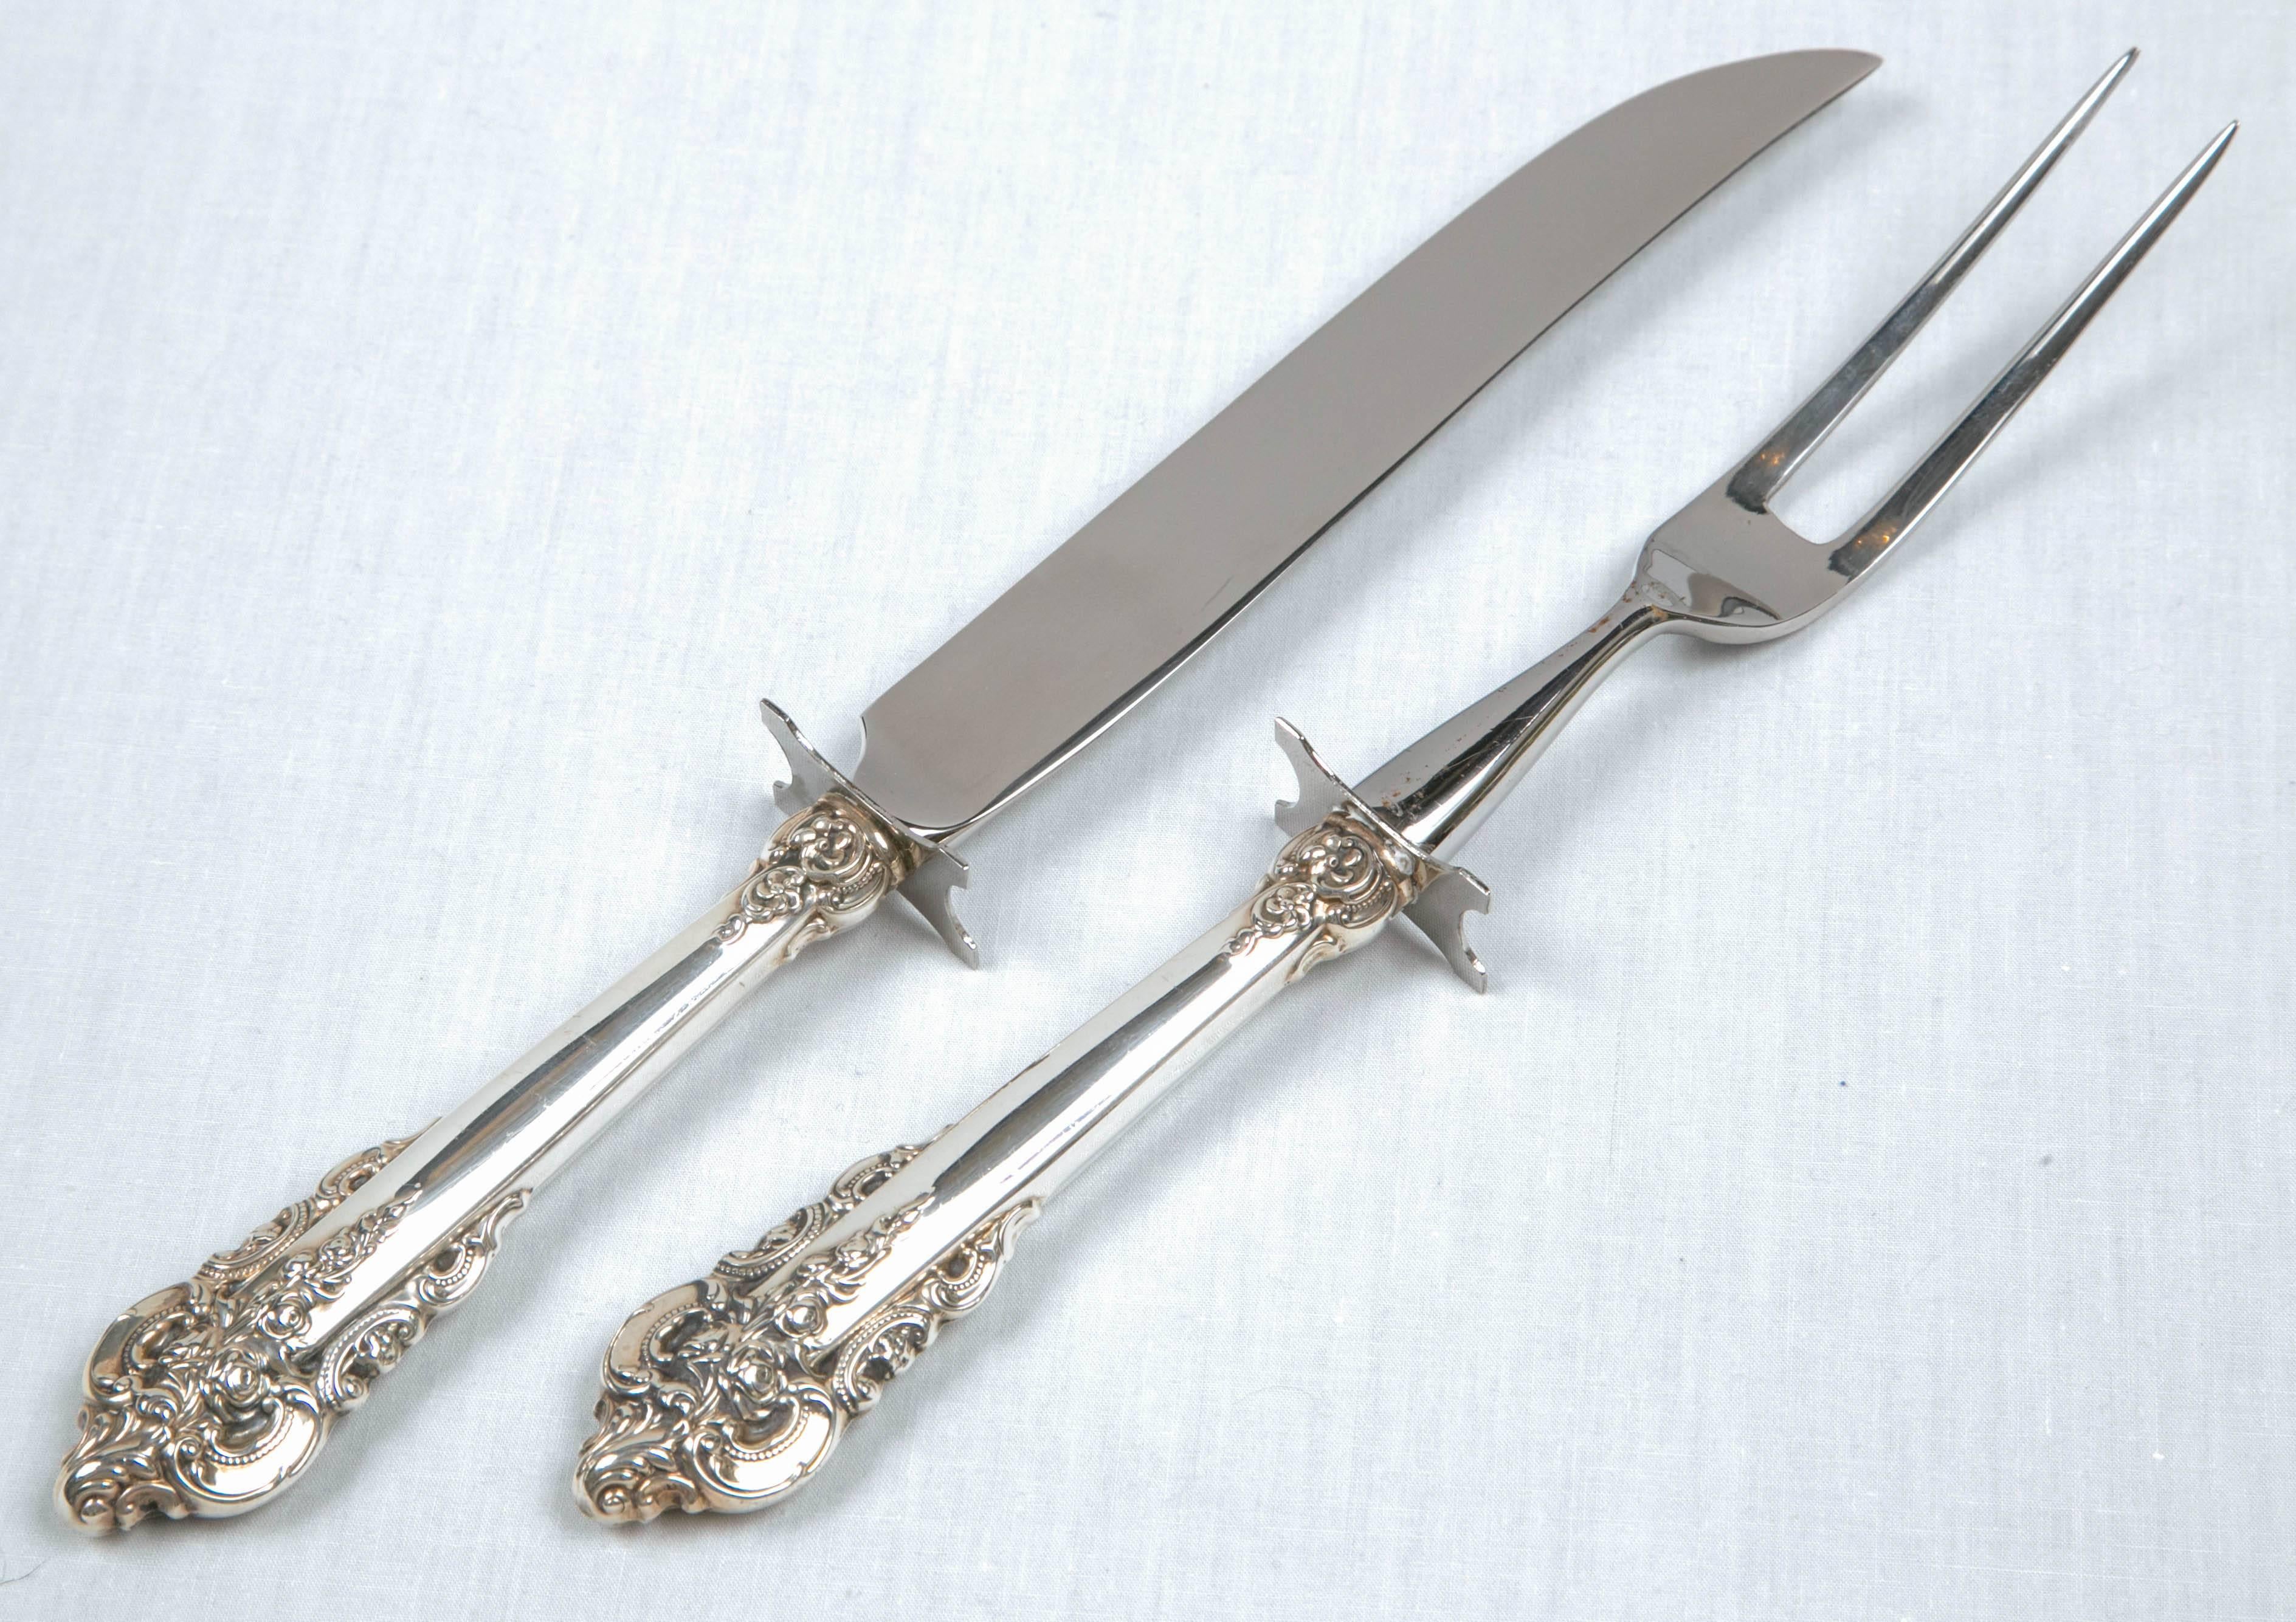 Grand Baroque Flatware Set by Wallace Sterling 2